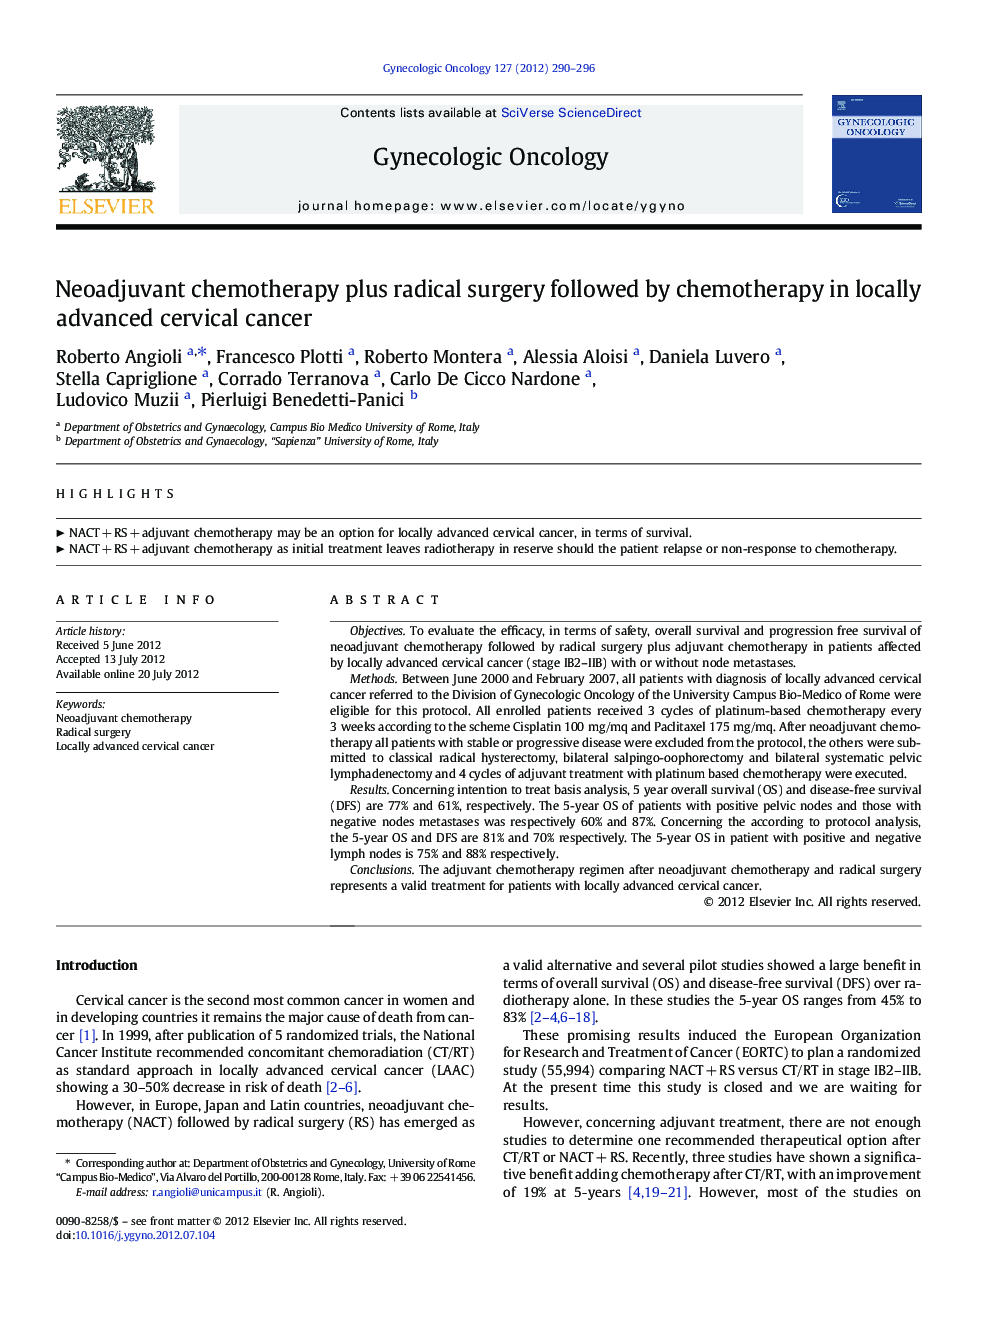 Neoadjuvant chemotherapy plus radical surgery followed by chemotherapy in locally advanced cervical cancer